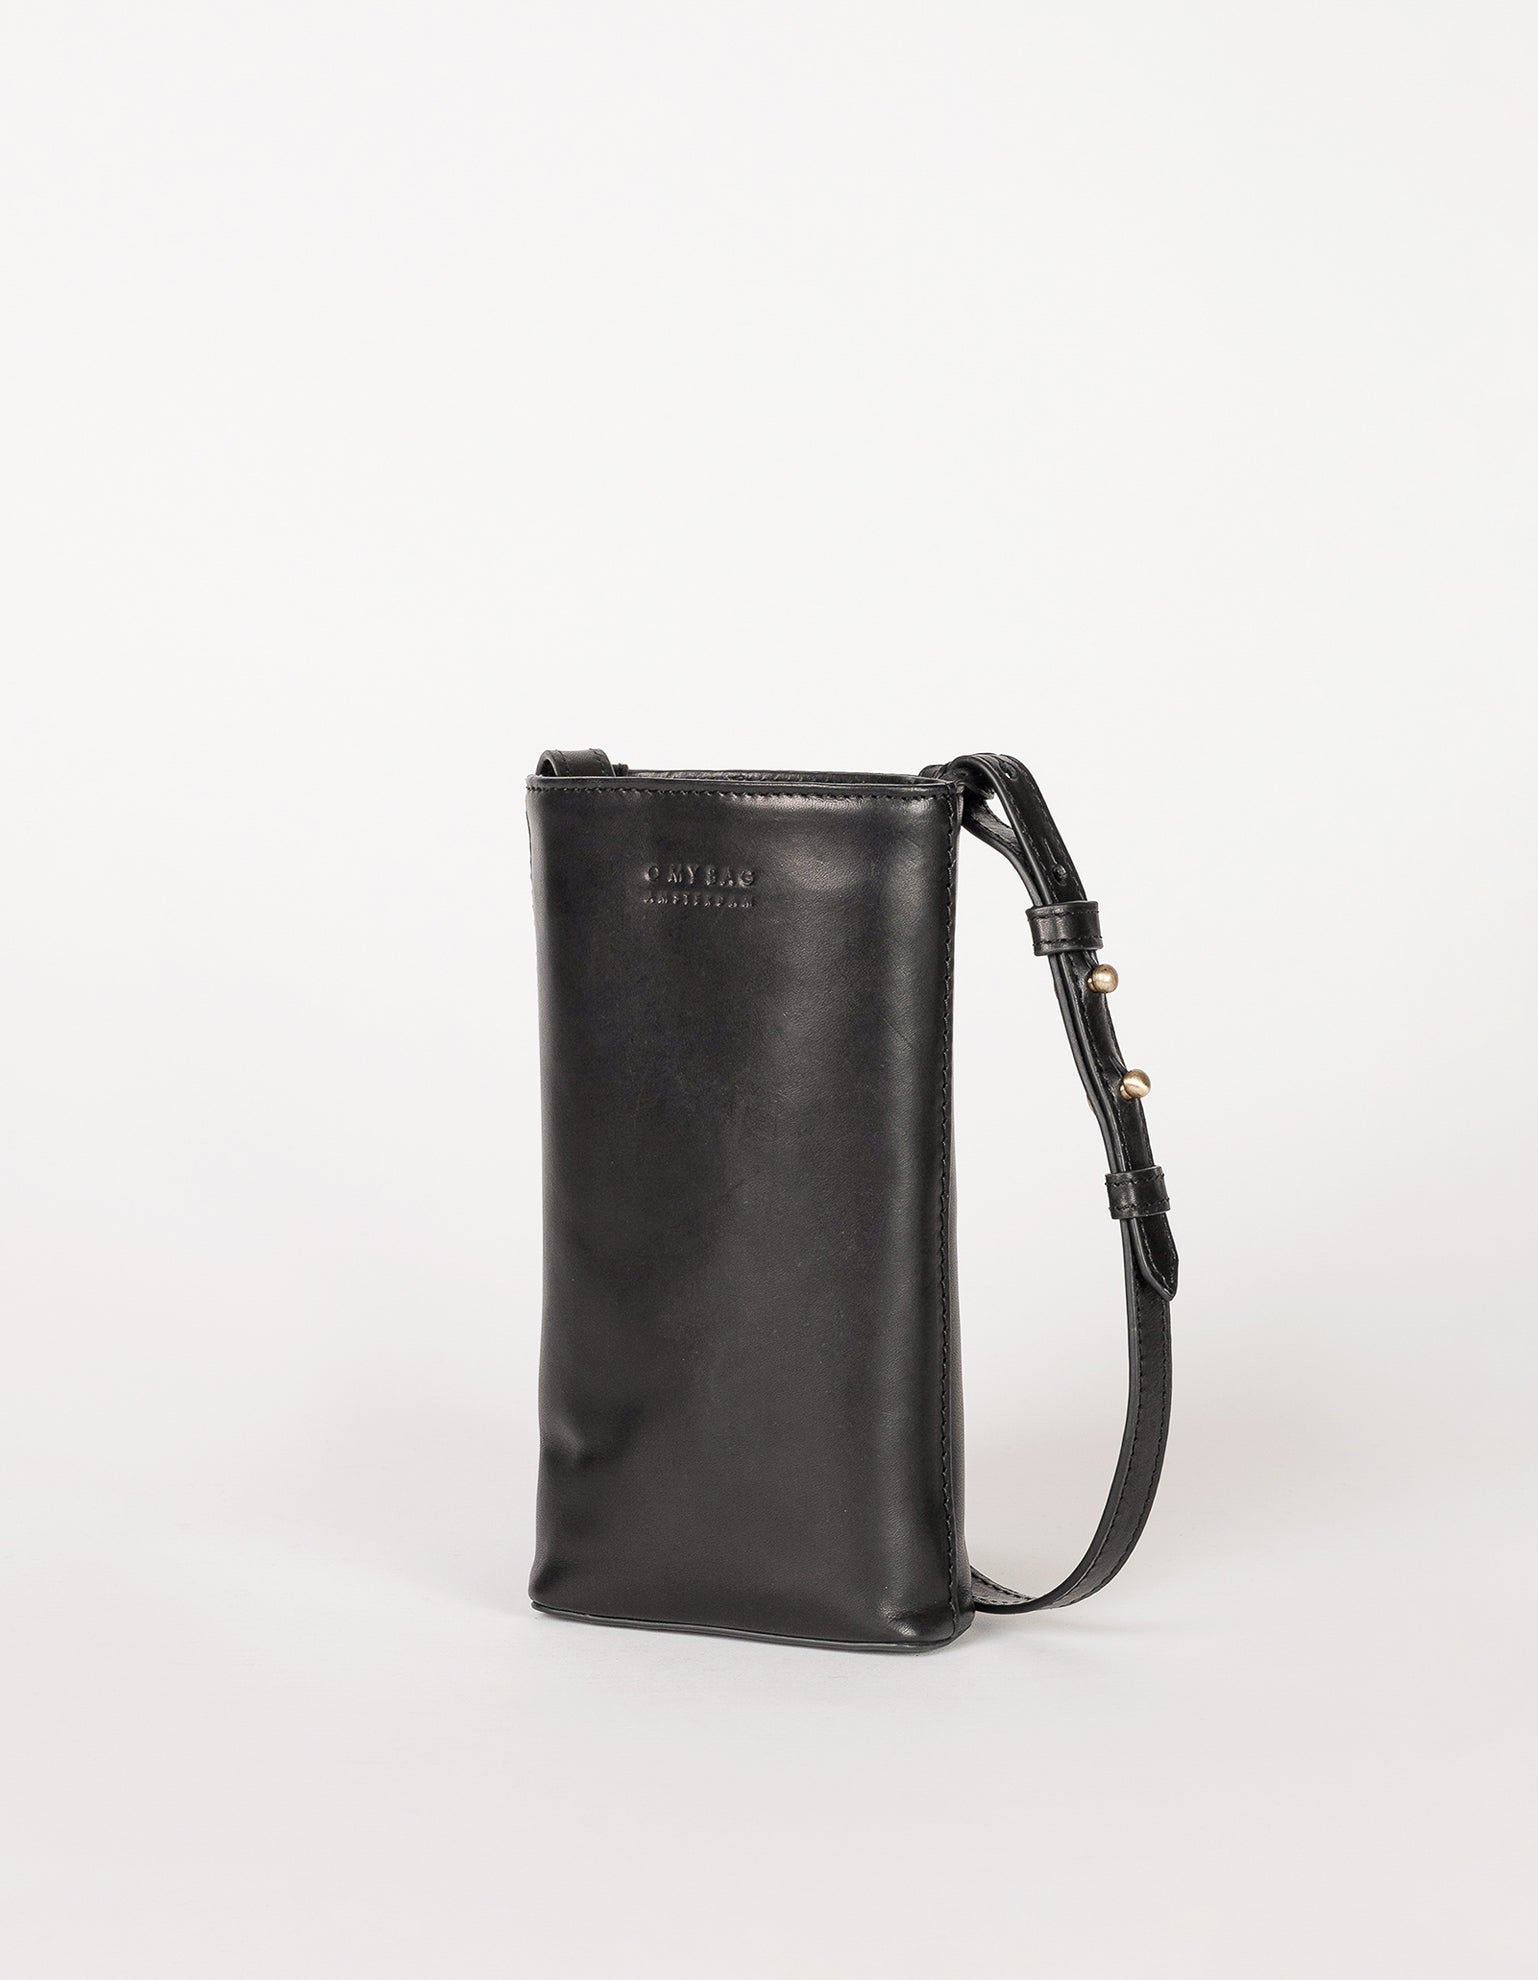 Charlie phone bag - black classic leather - side product image with adjustable leather strap